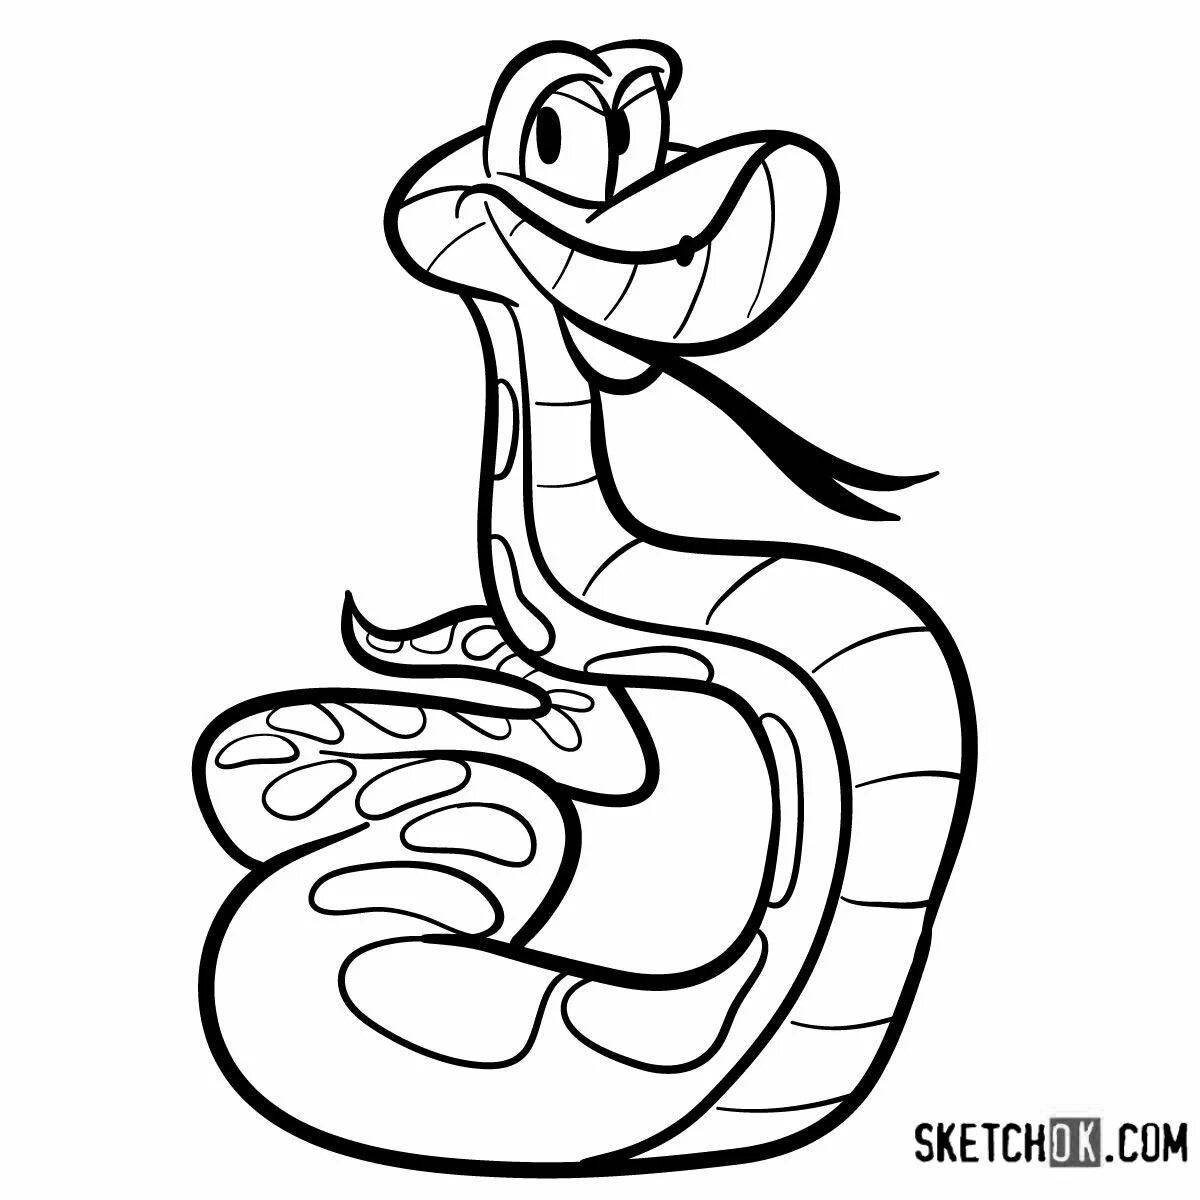 Kaa's adorable coloring page